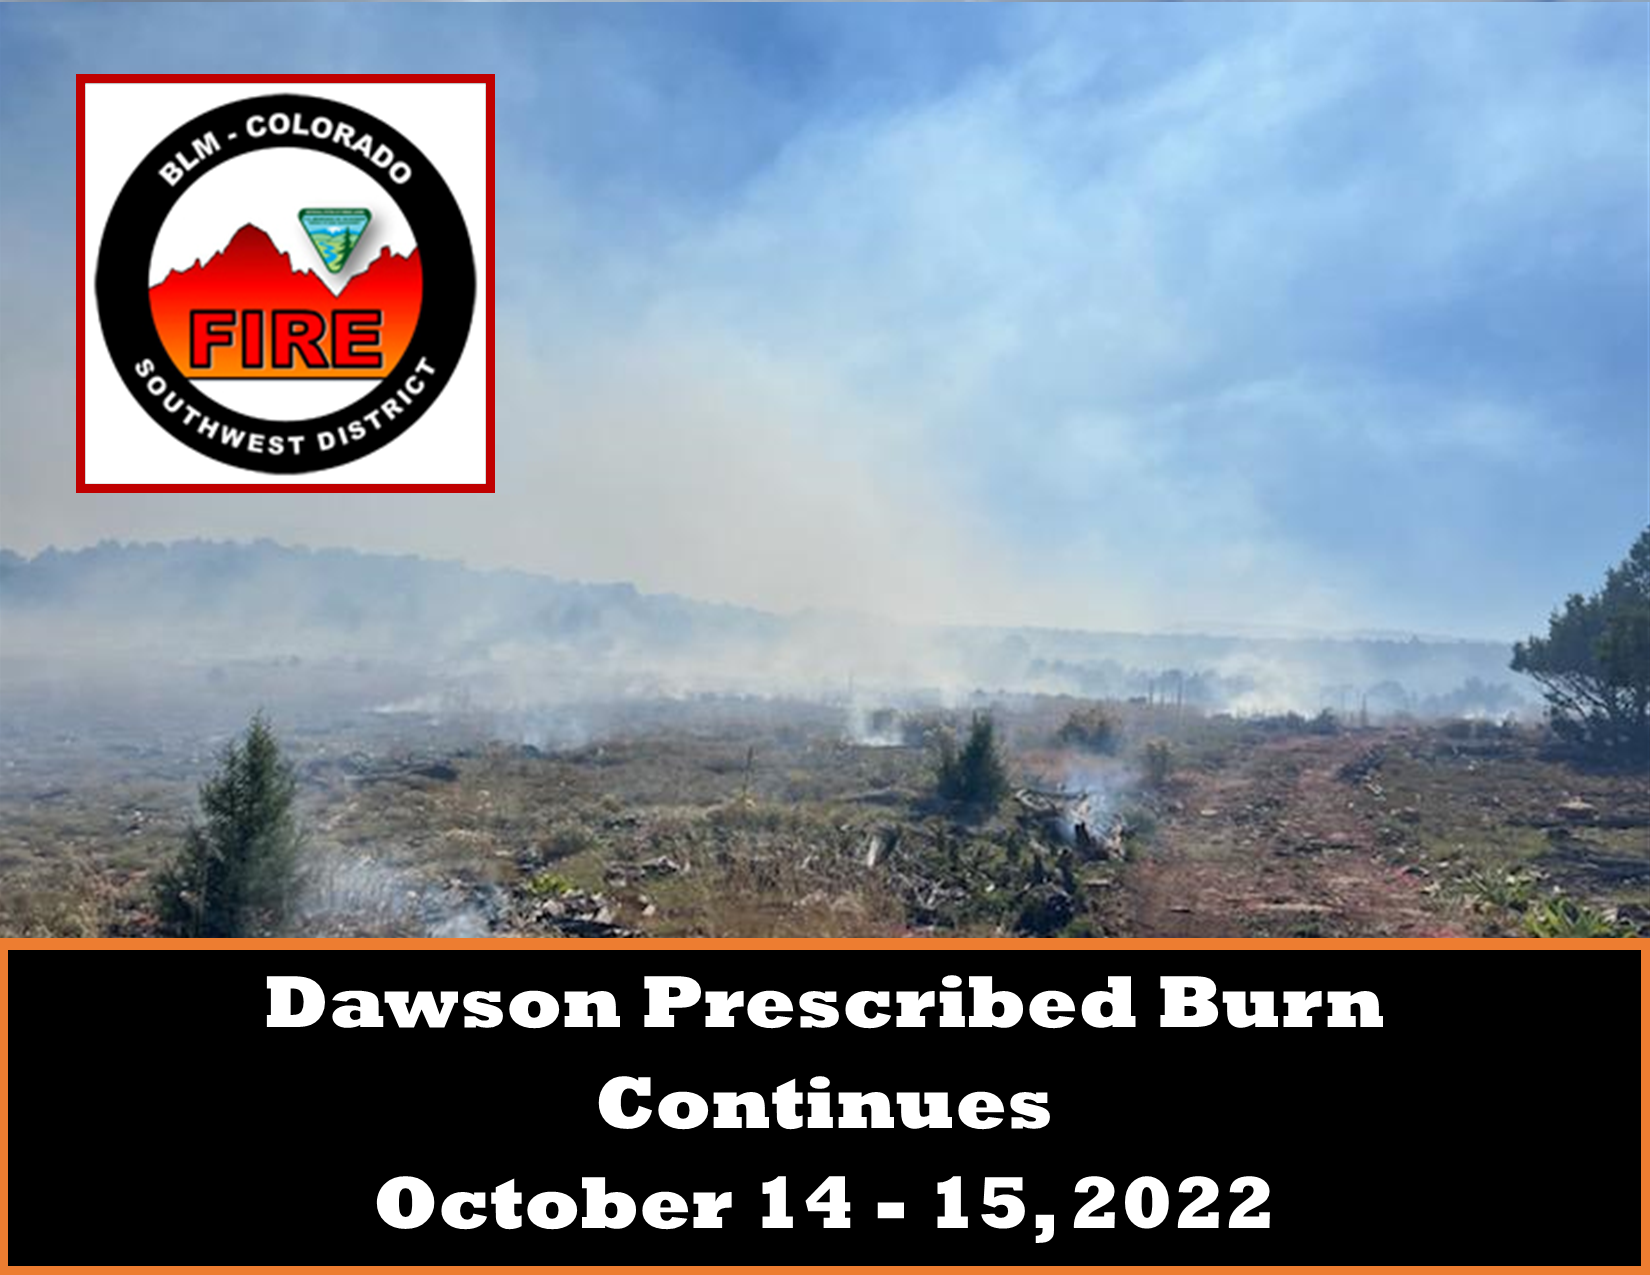 Dawson Prescribed Burn Continues Oct. 14-15, 2022 Photo of small ground vegetation with smoke smoldering, some very small trees and blue sky. BLM Colorado Southwest District Fire logo.